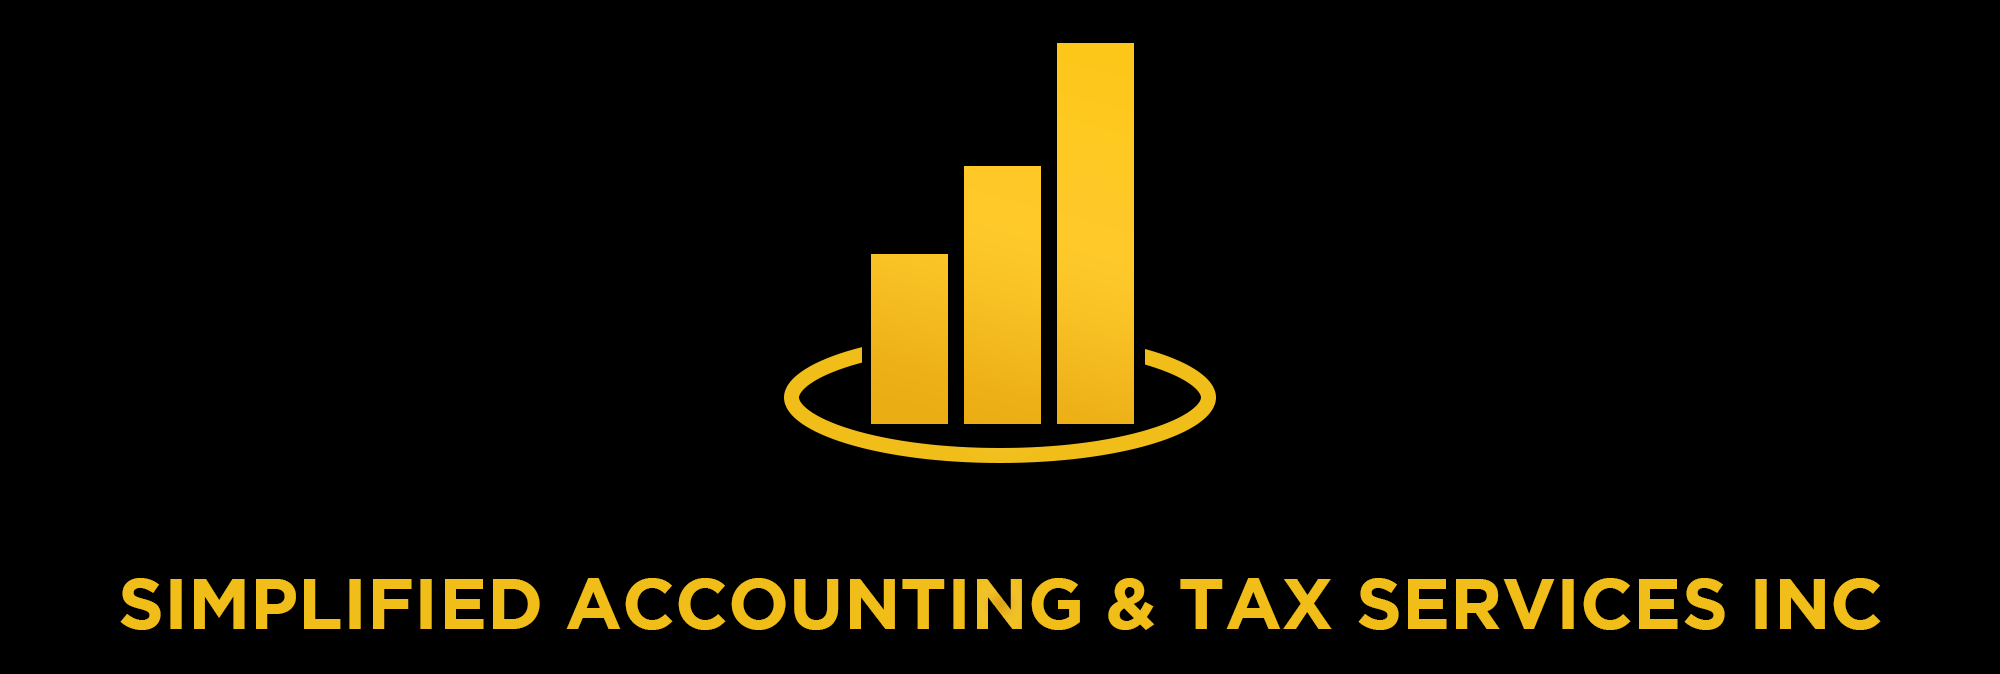 Simplified Accounting & Tax Services Inc